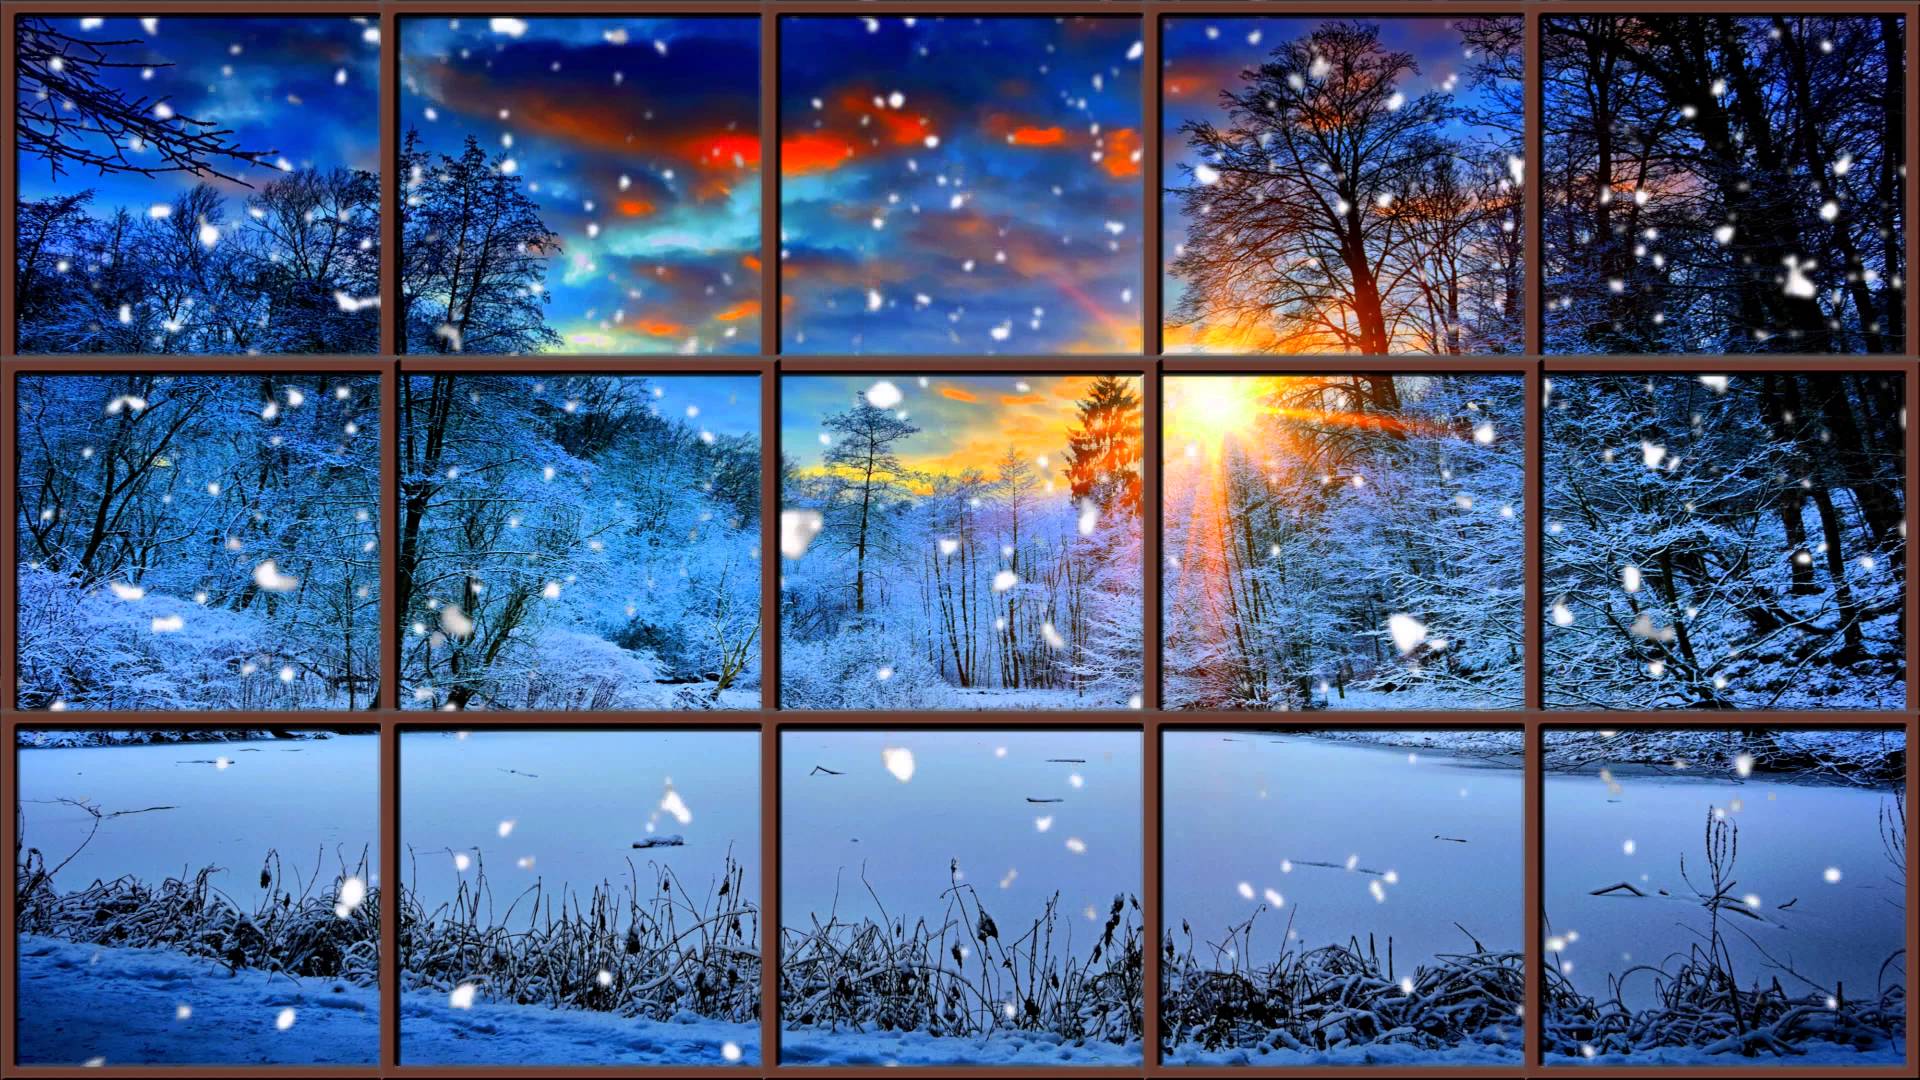 Winter View HD Wallpaper Background Image 1920x1080 1920x1080